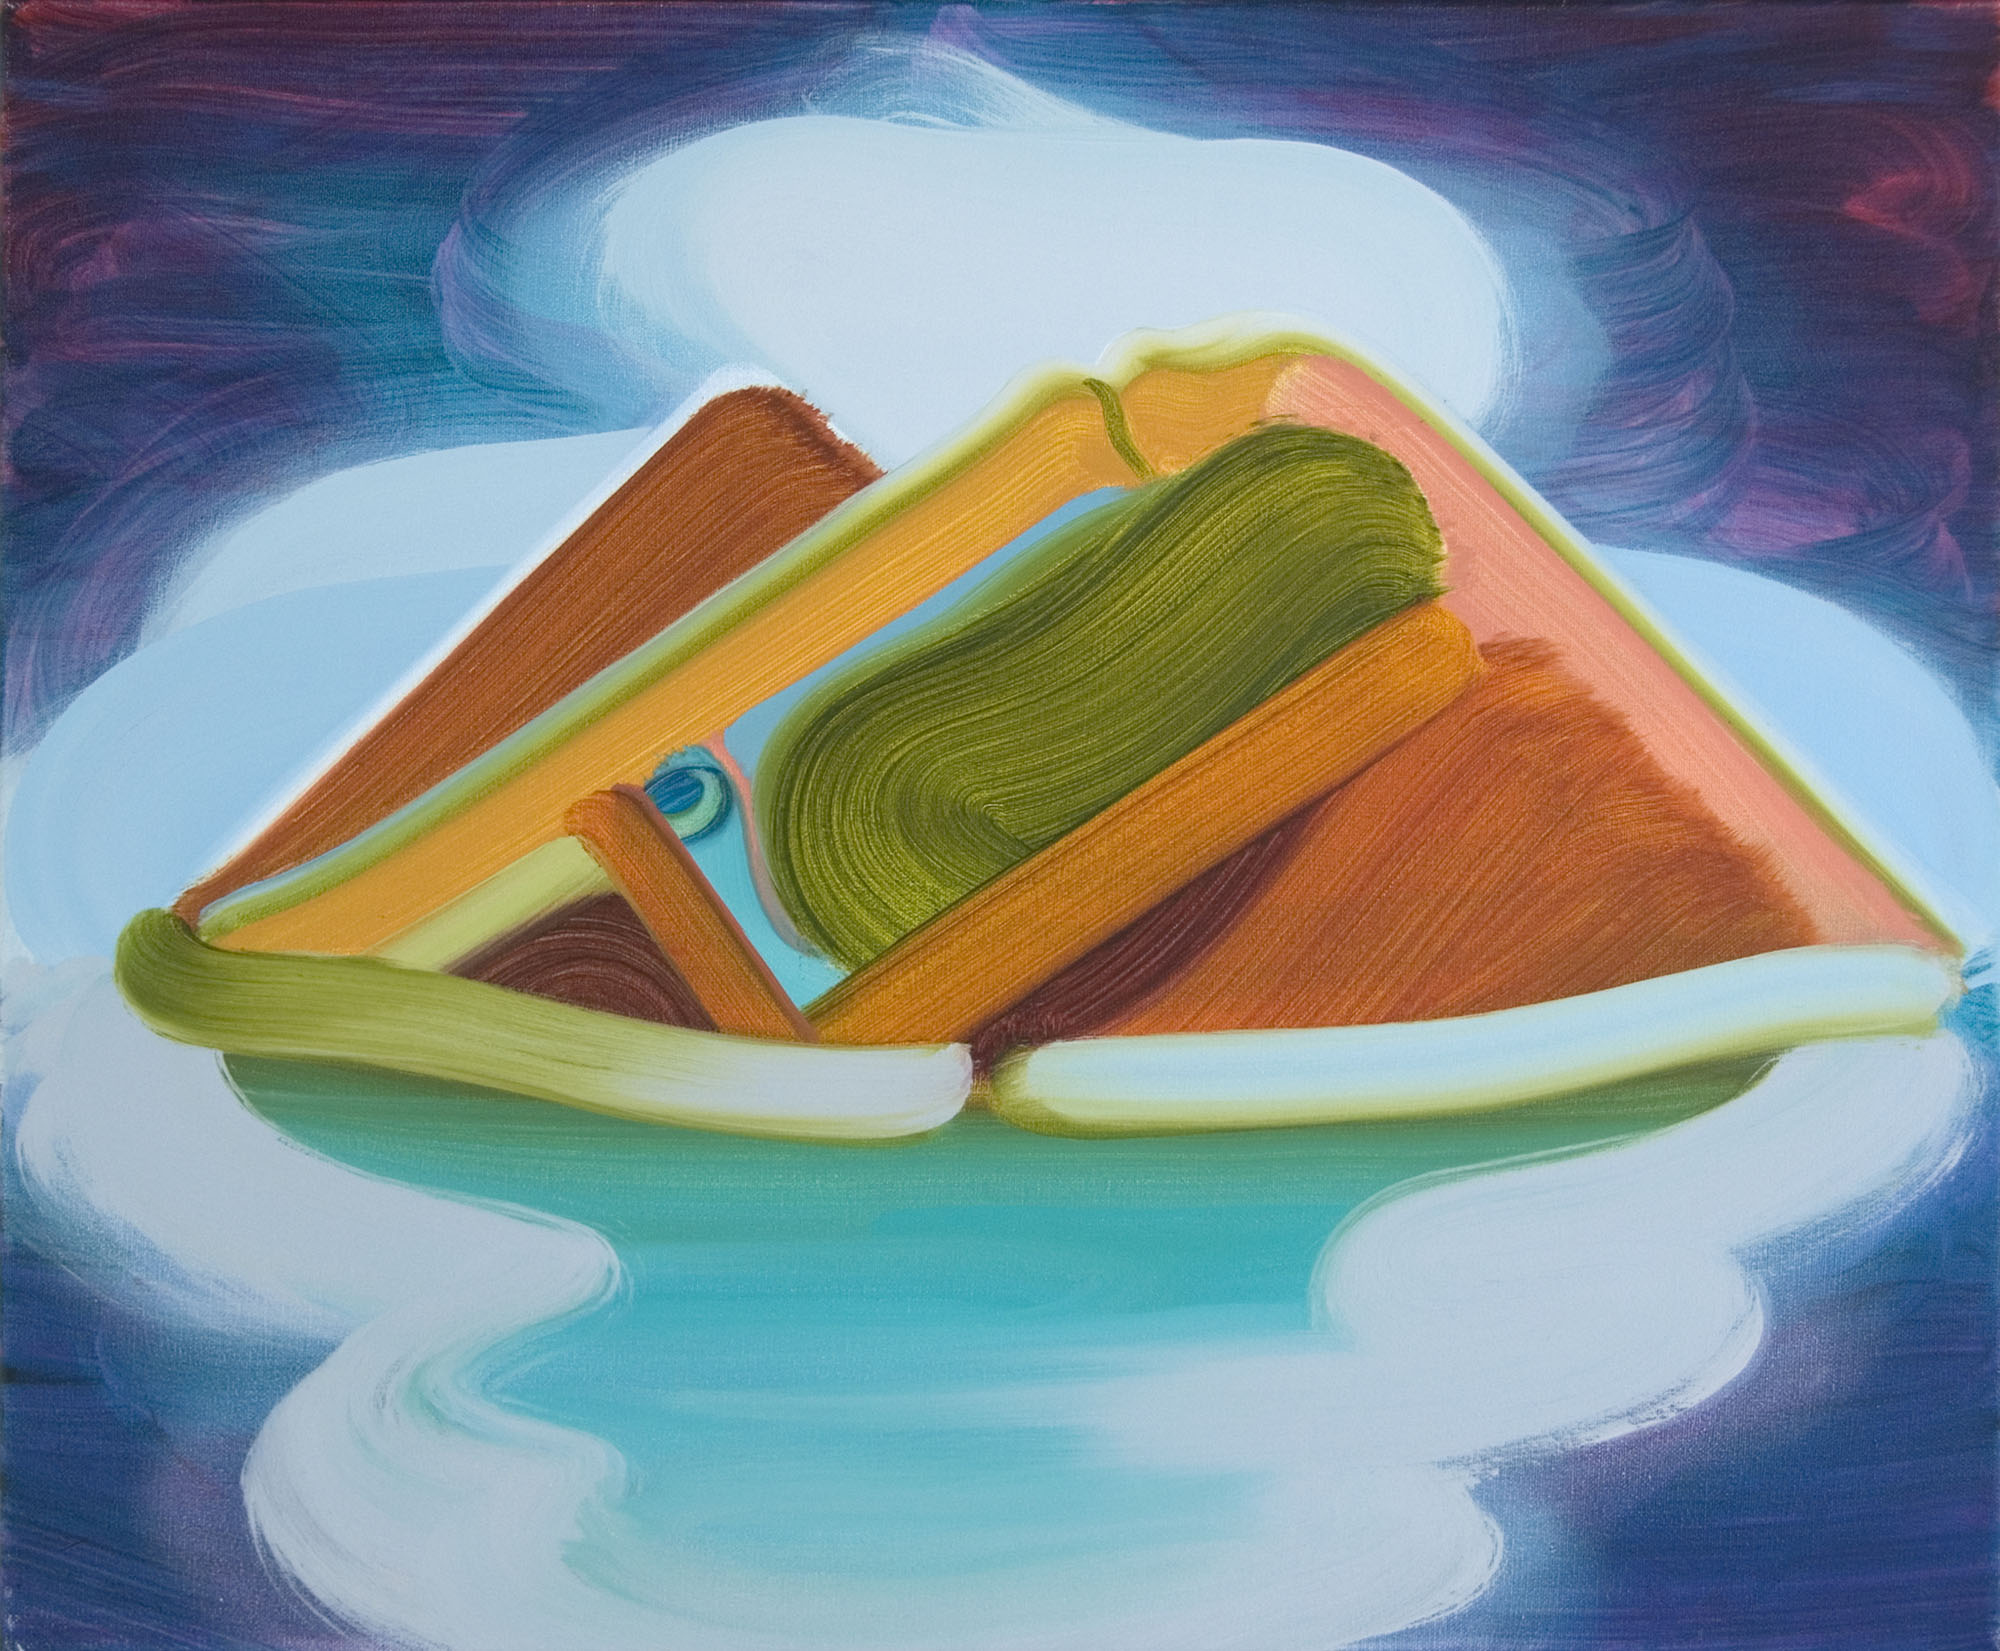 Anders Oinonen, Island Lake, 2009. Oil on canvas. Collection of Joshua Newcomer and Tejal Shah